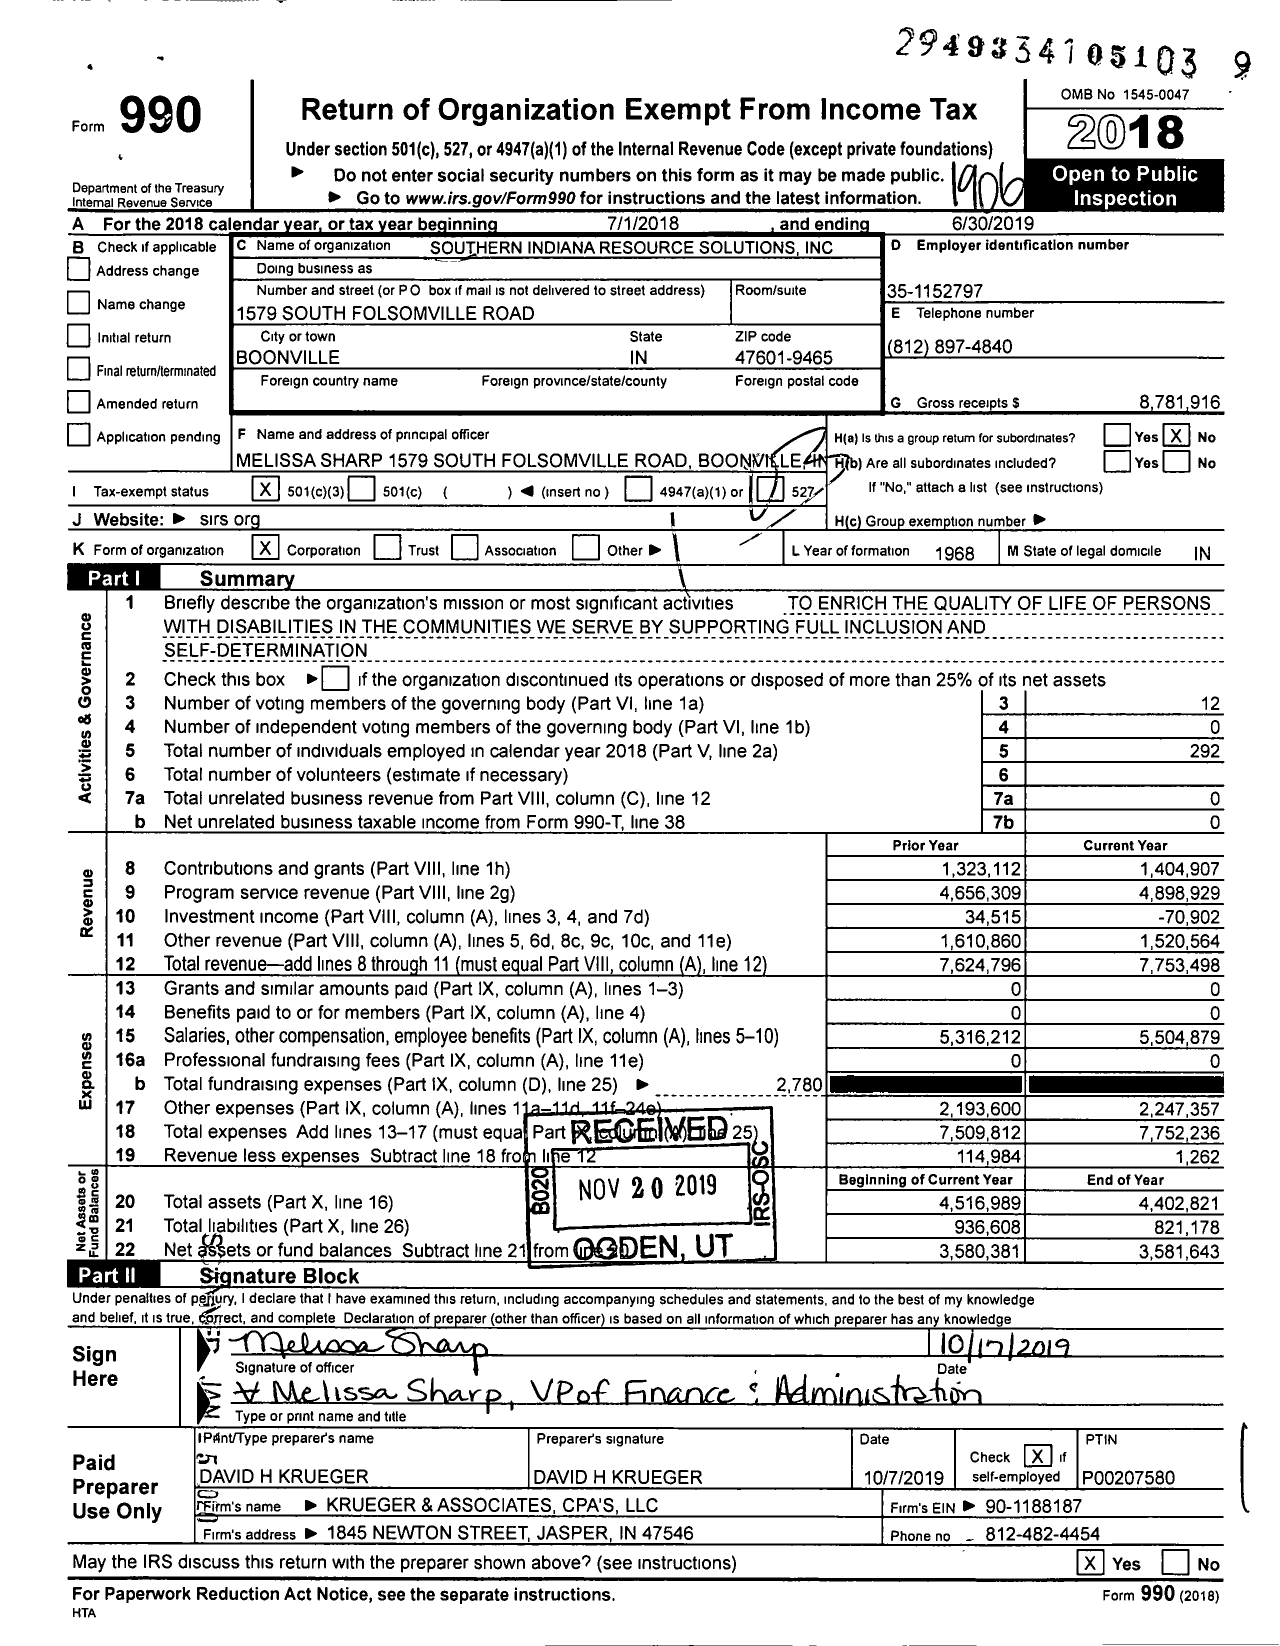 Image of first page of 2018 Form 990 for Southern Indiana Resource Solutions (SIRS)